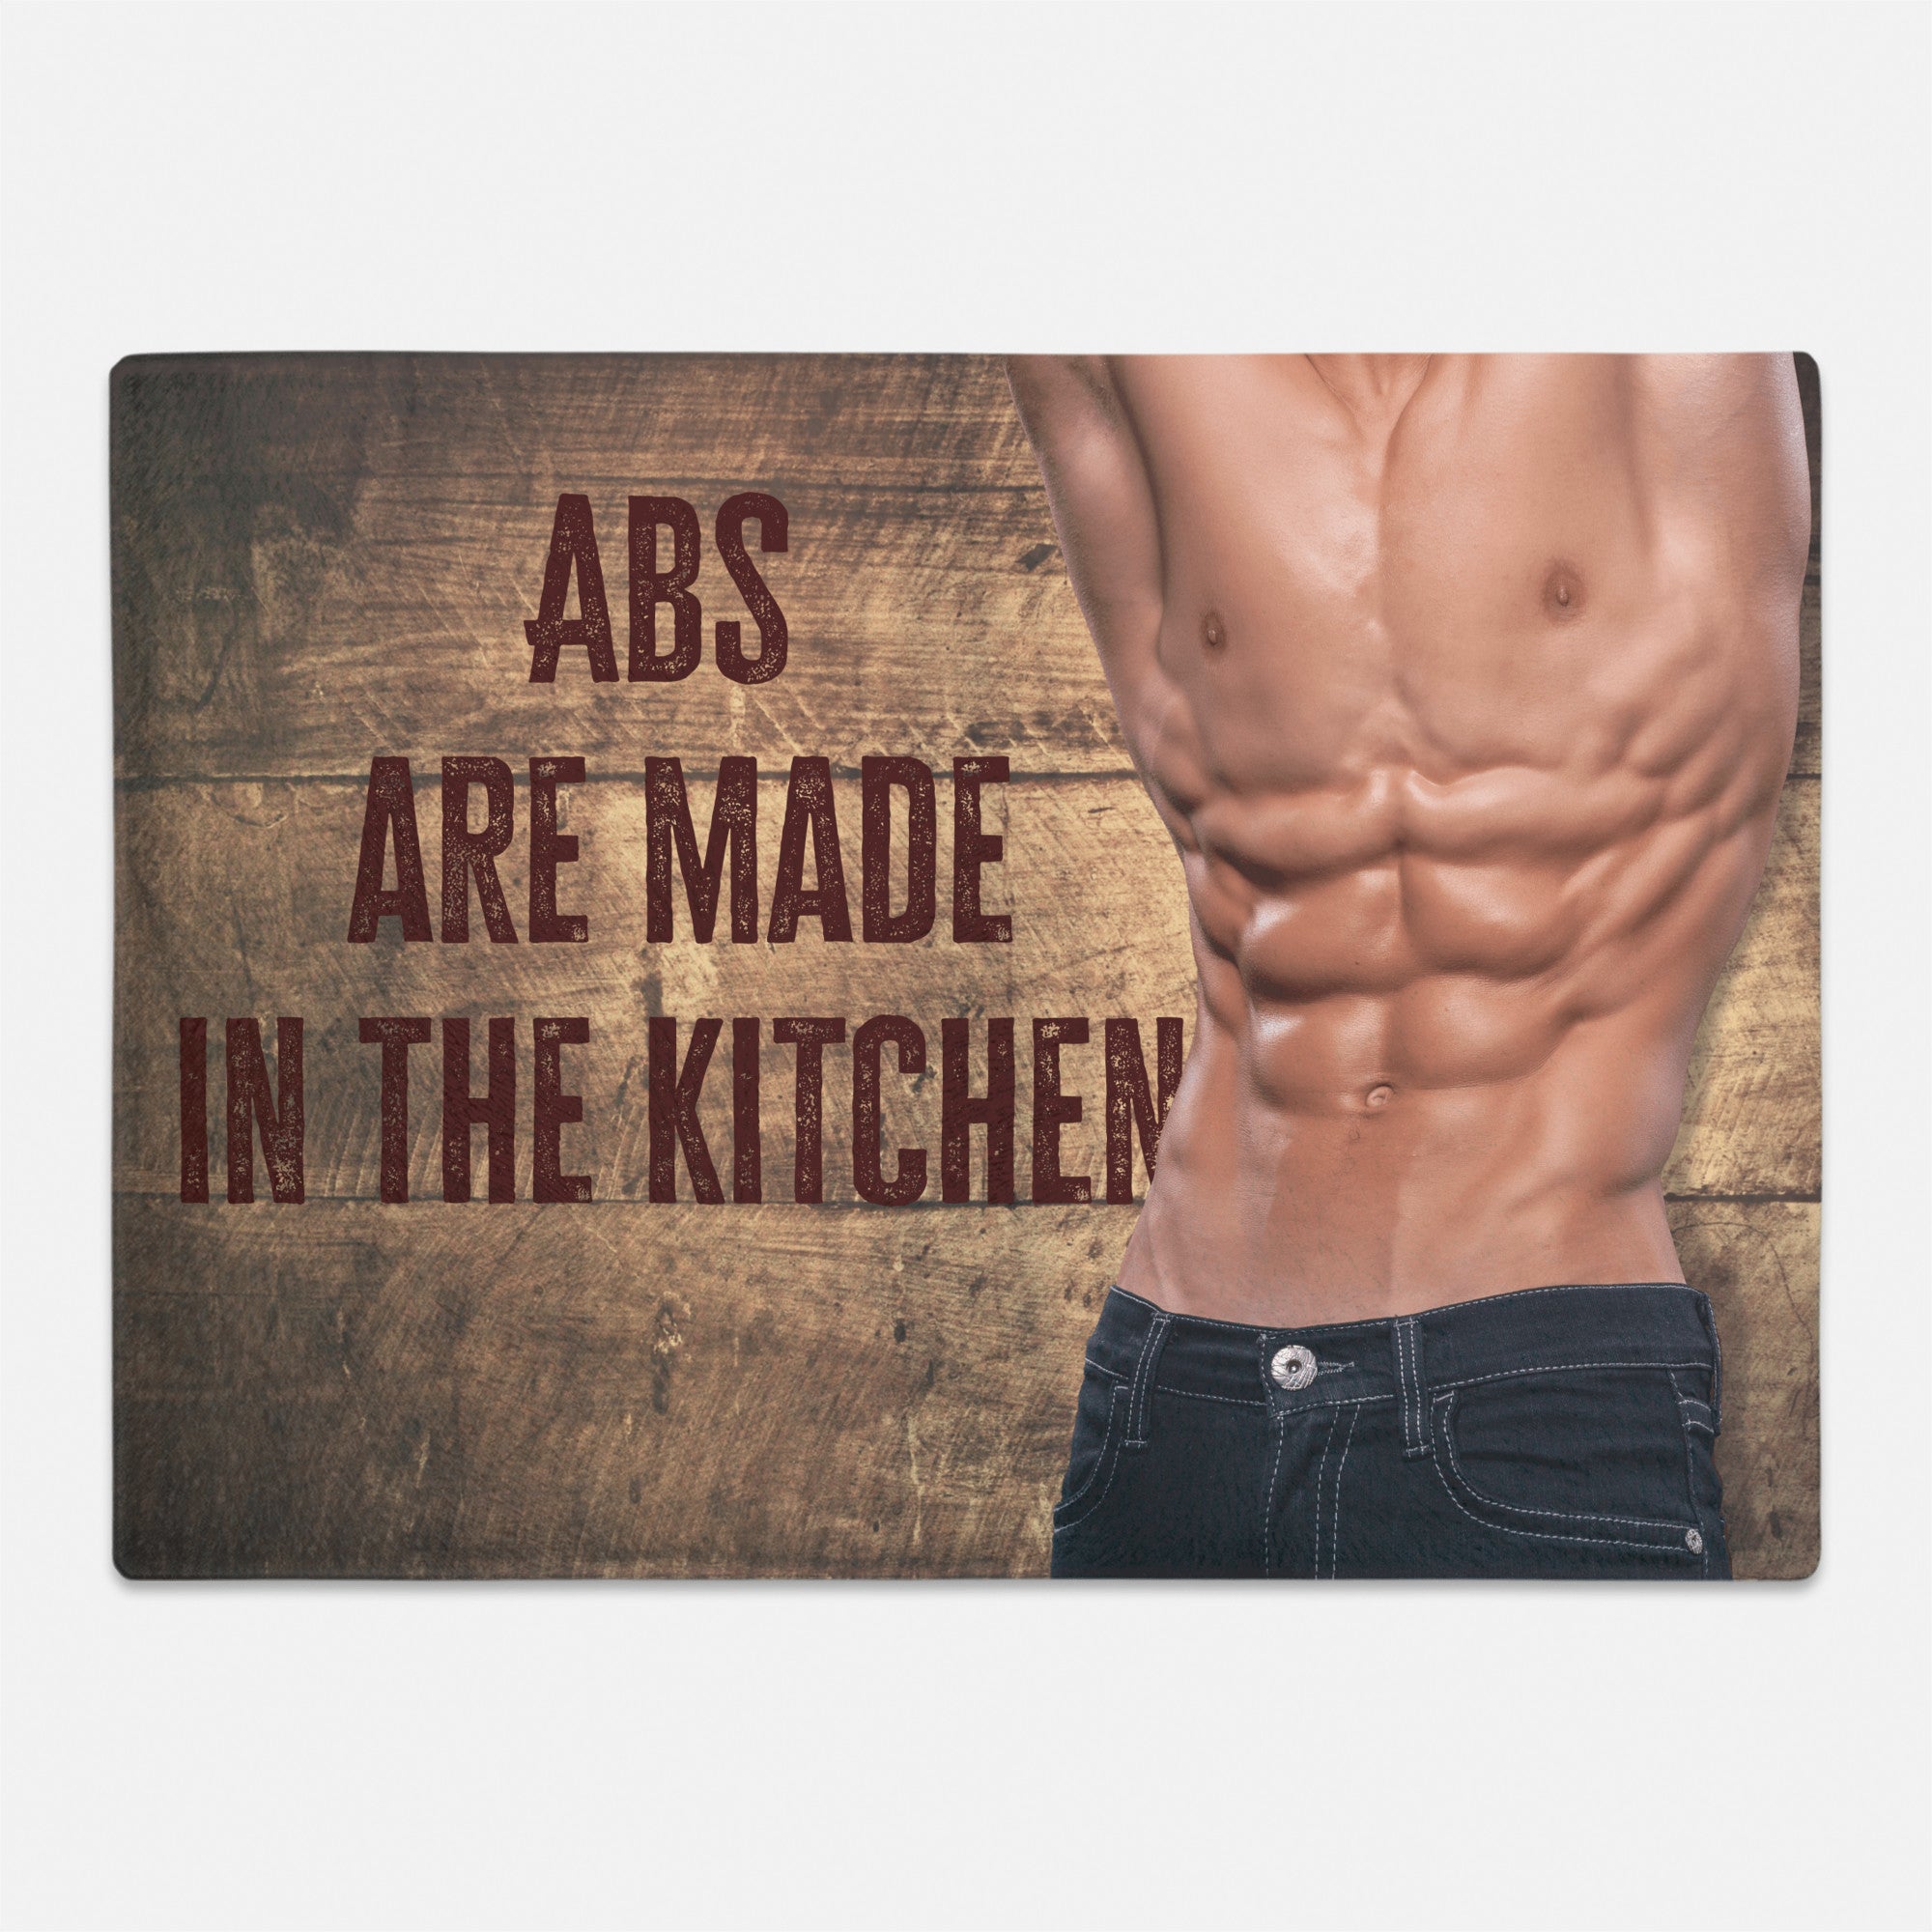 Abs Are Made in the Kitchen Glass Cutting Board - 15.75"x11.5"